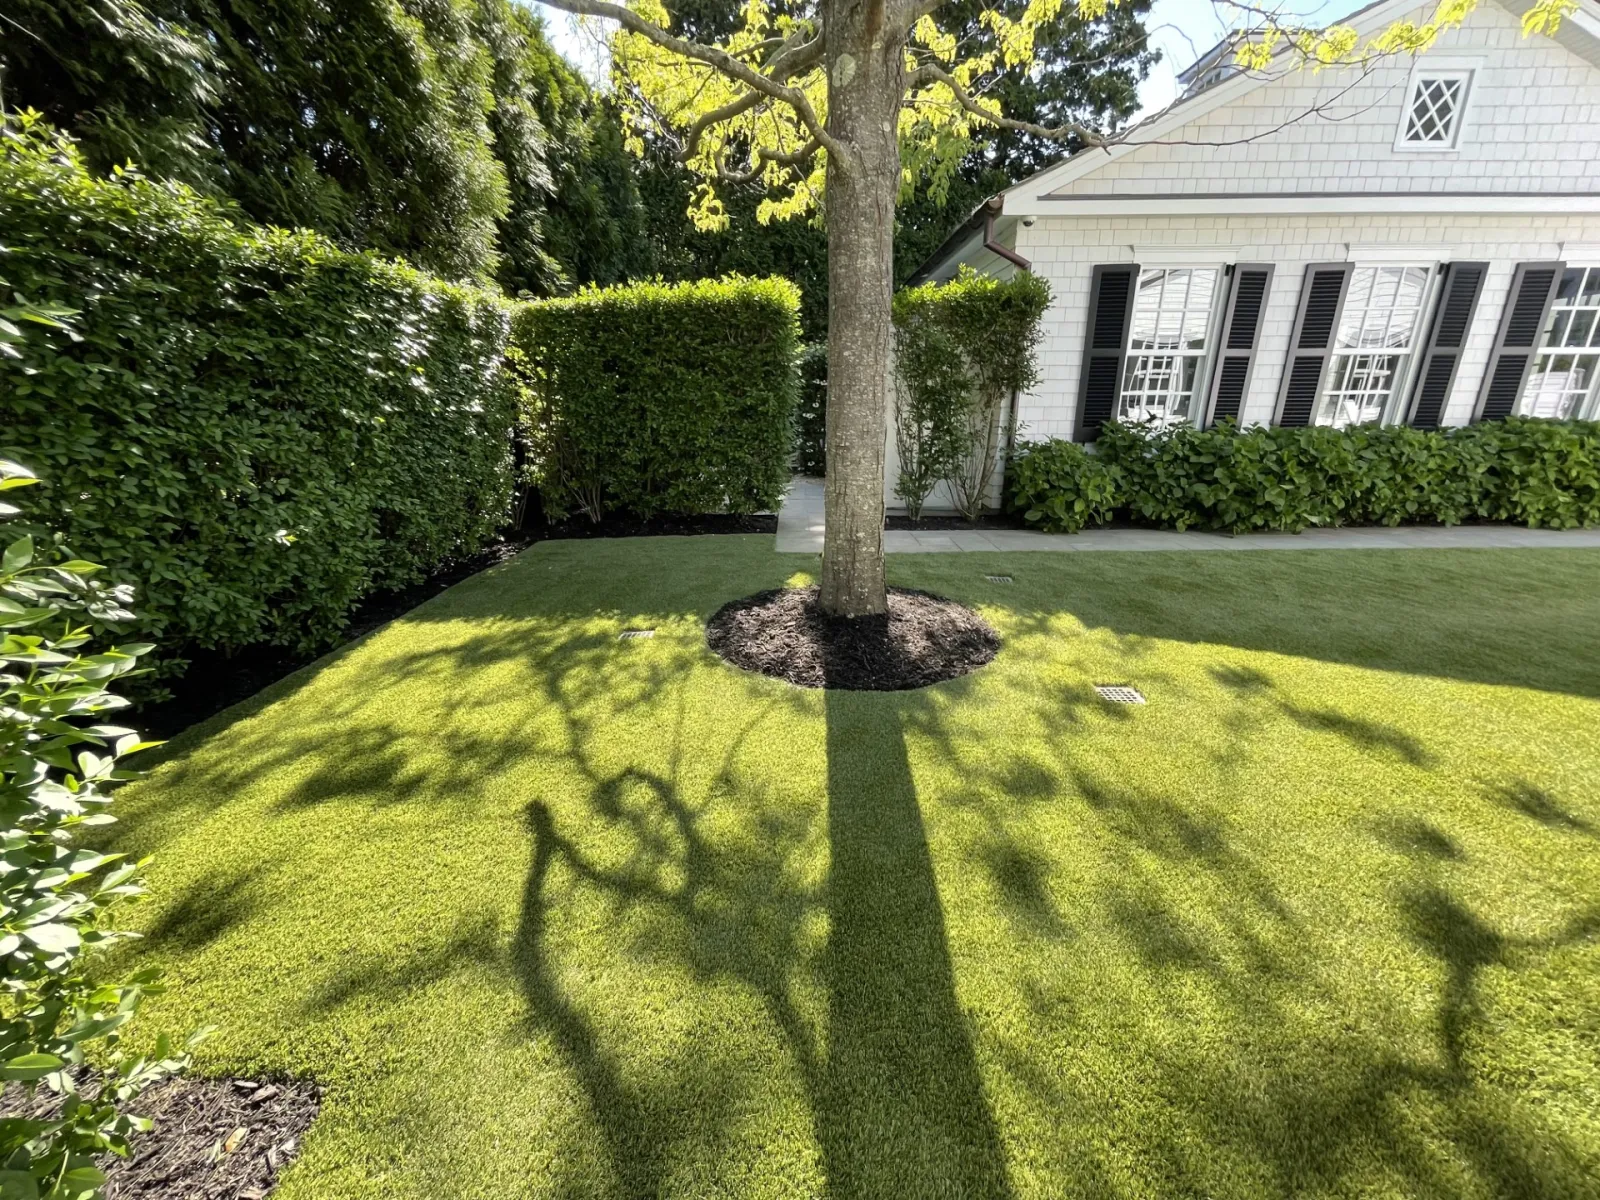 a person's shadow on a lawn in front of a house